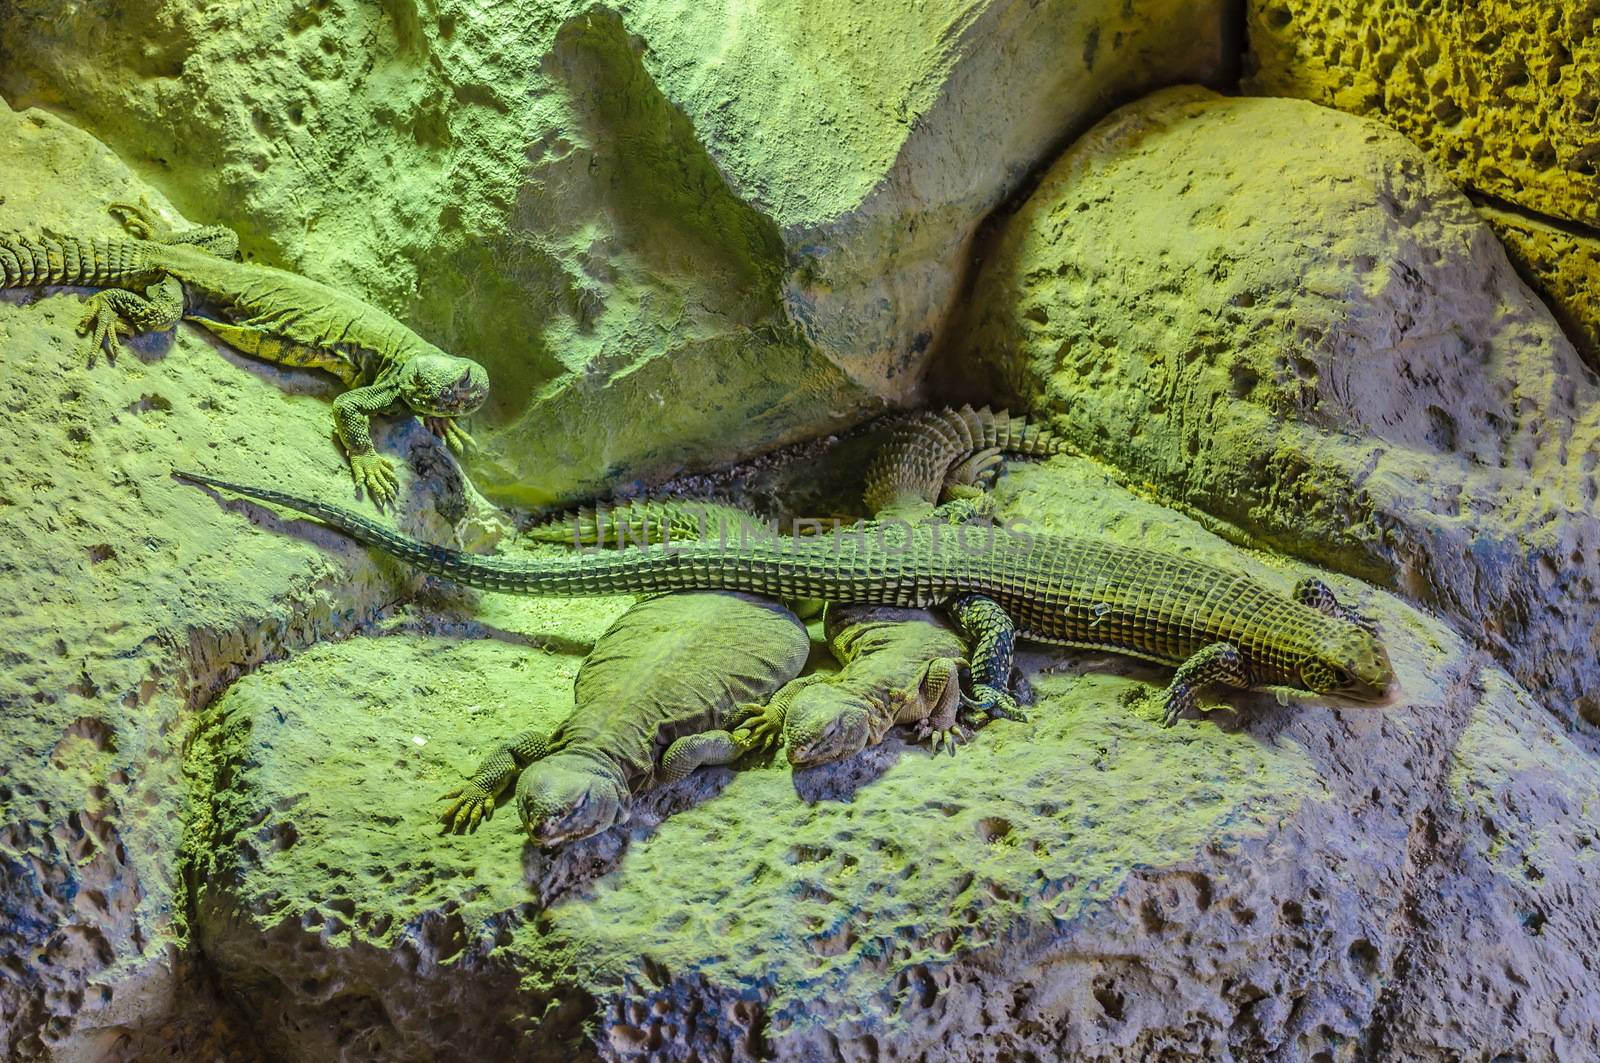 Plated lizzard in Loro Parque, Tenerife, Canary Islands. by Eagle2308